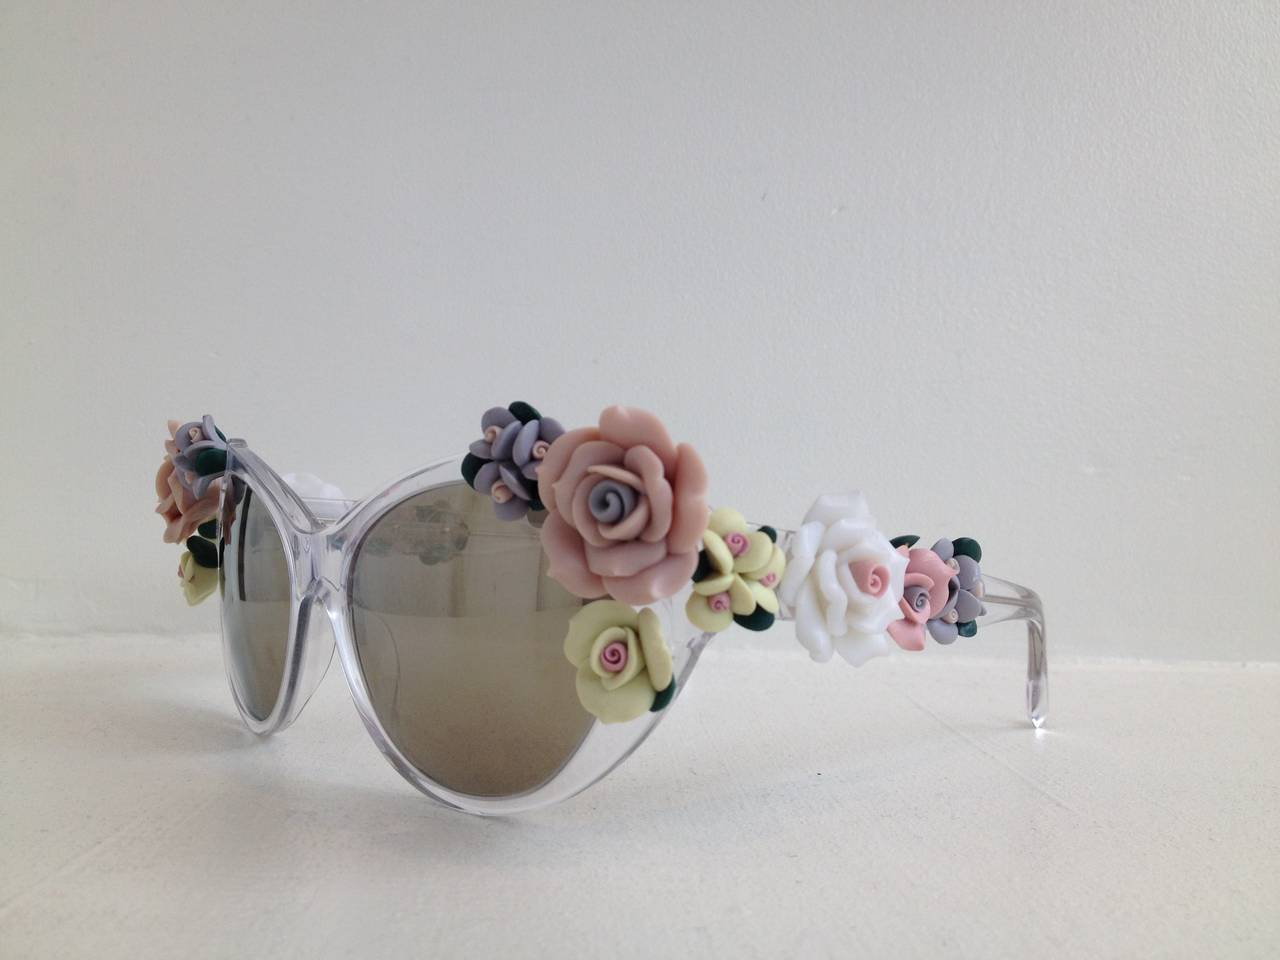 Absolutely fabulous! These glasses do a lot more than keep the sun out. Crystal clear frames, in a retro cat eye shape, are decorated on either temple with bouquets of delicate, sculptural, pastel rosettes. The lenses have a deep honey-colored